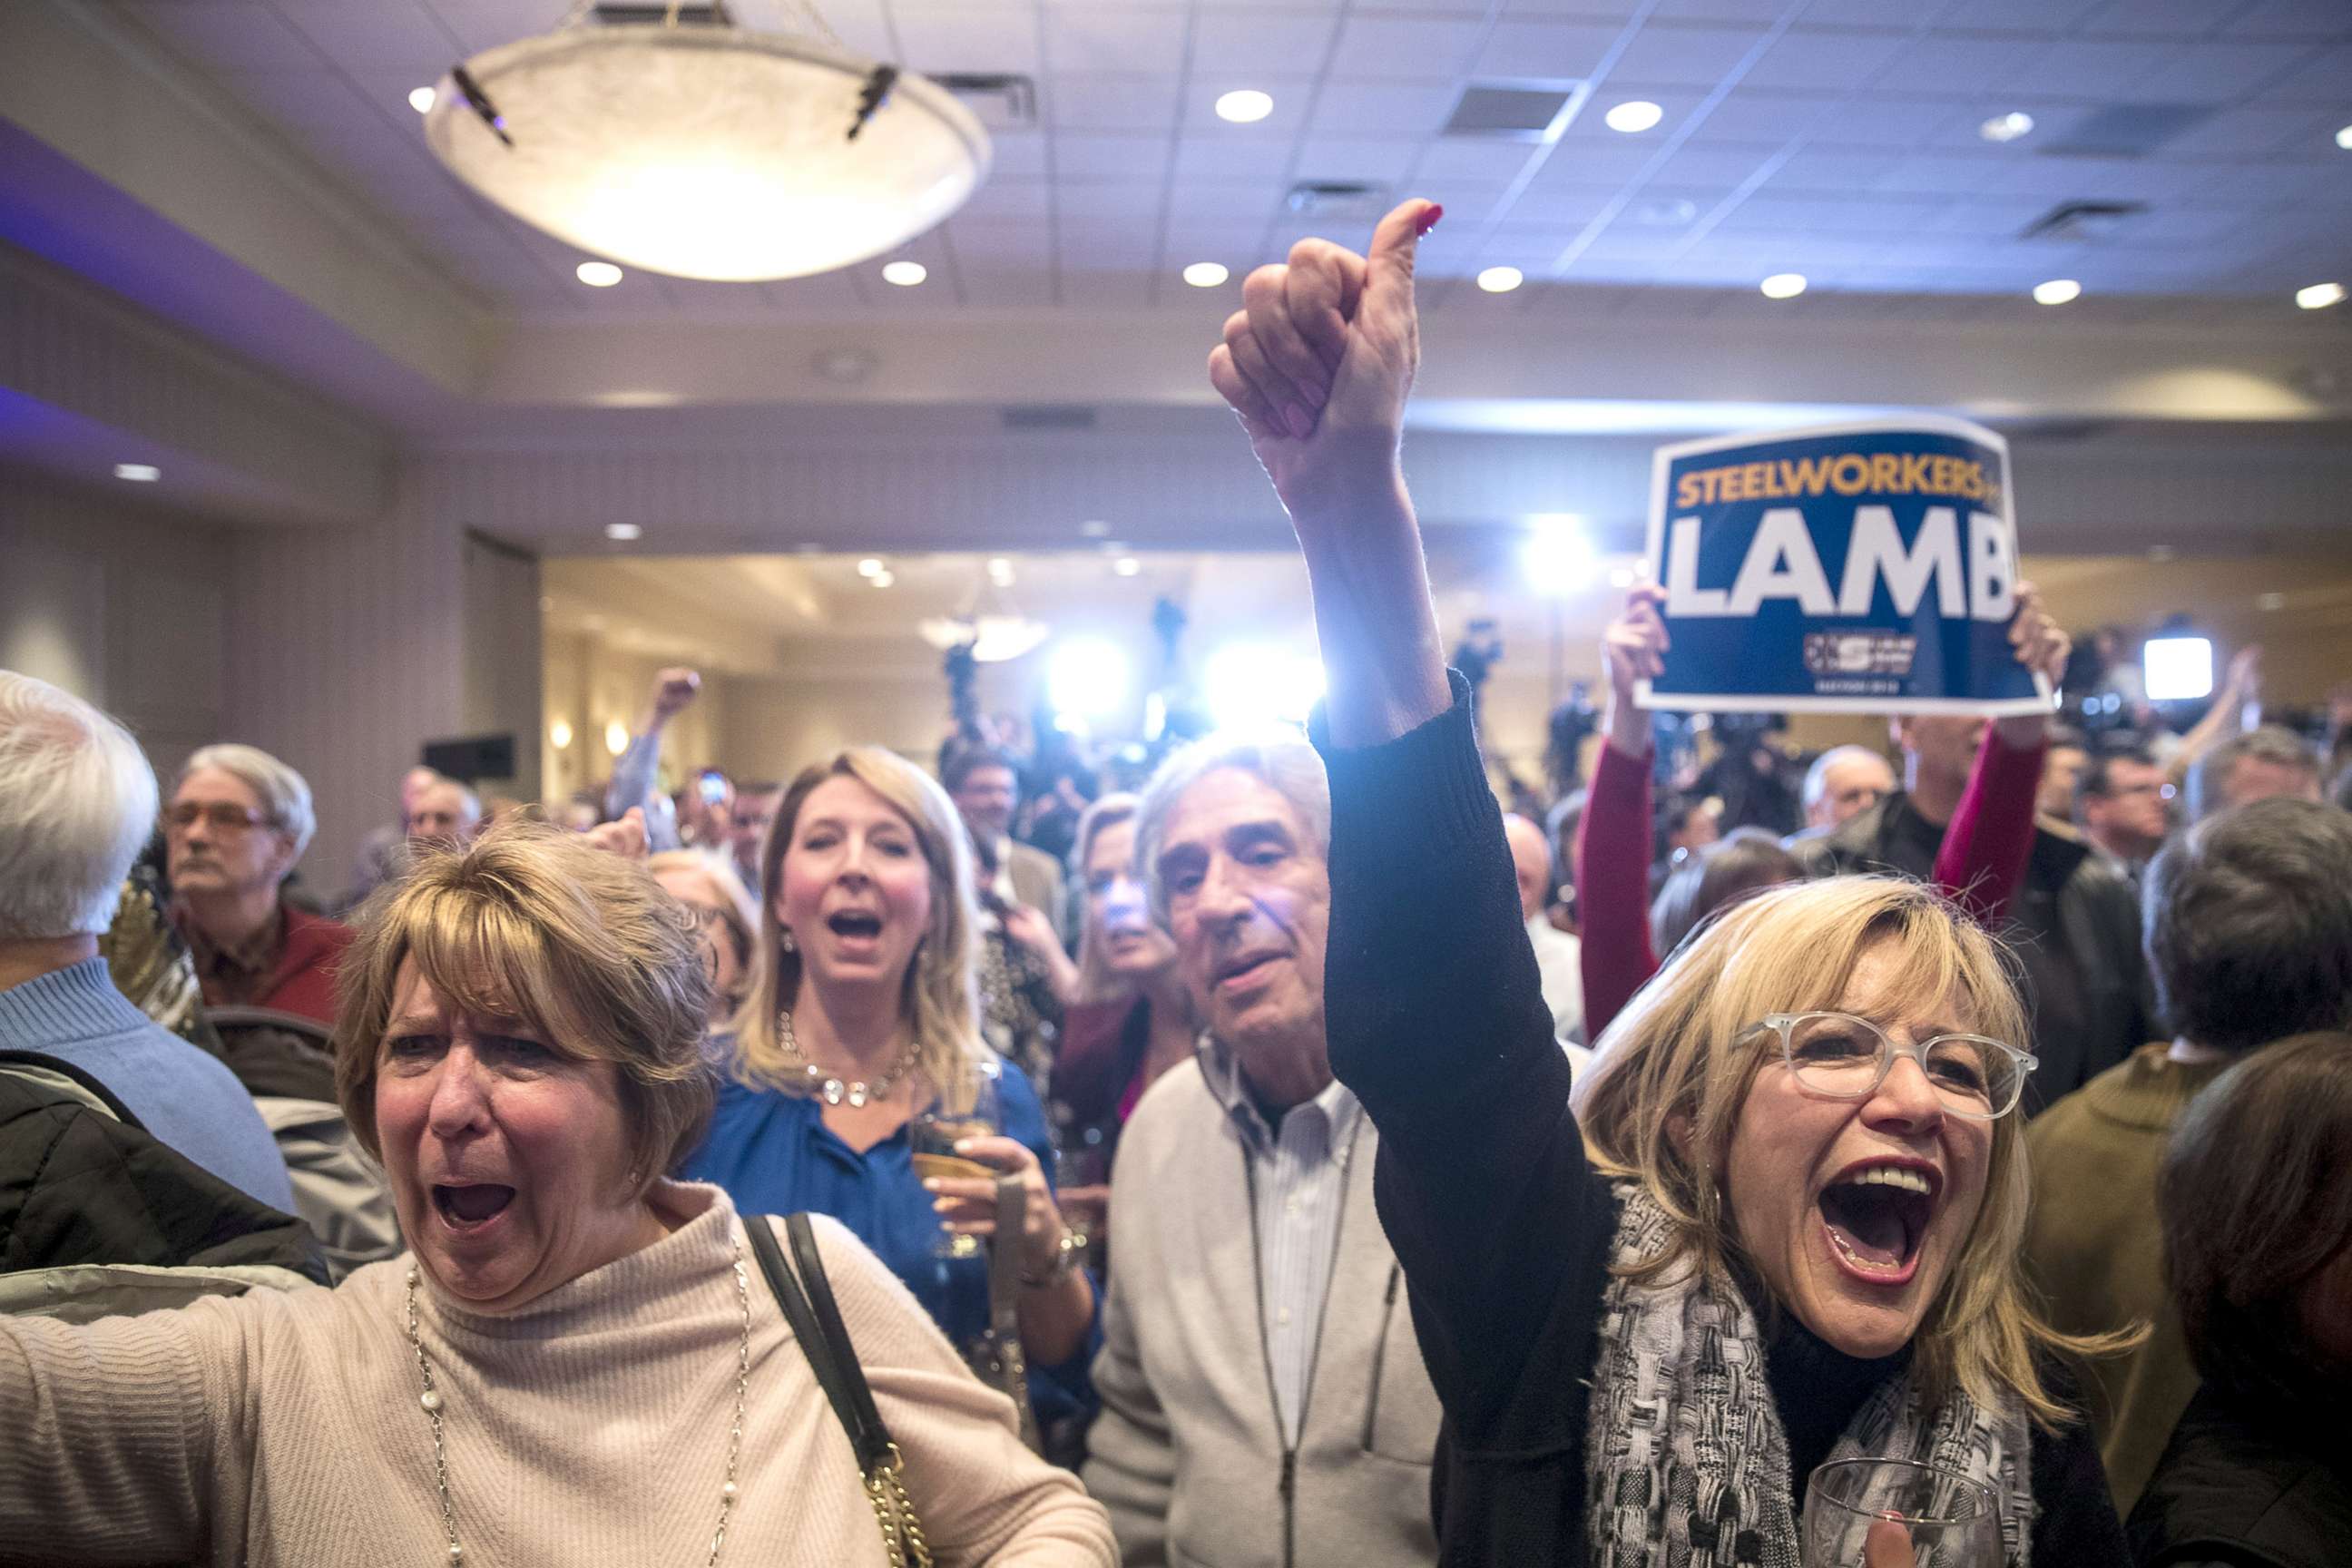 PHOTO: Supporters cheer as they watch election returns at an election night event for Conor Lamb,  Democratic congressional candidate for Pennsylvania's 18th district, March 13, 2018 in Canonsburg, Pennsylvania. 